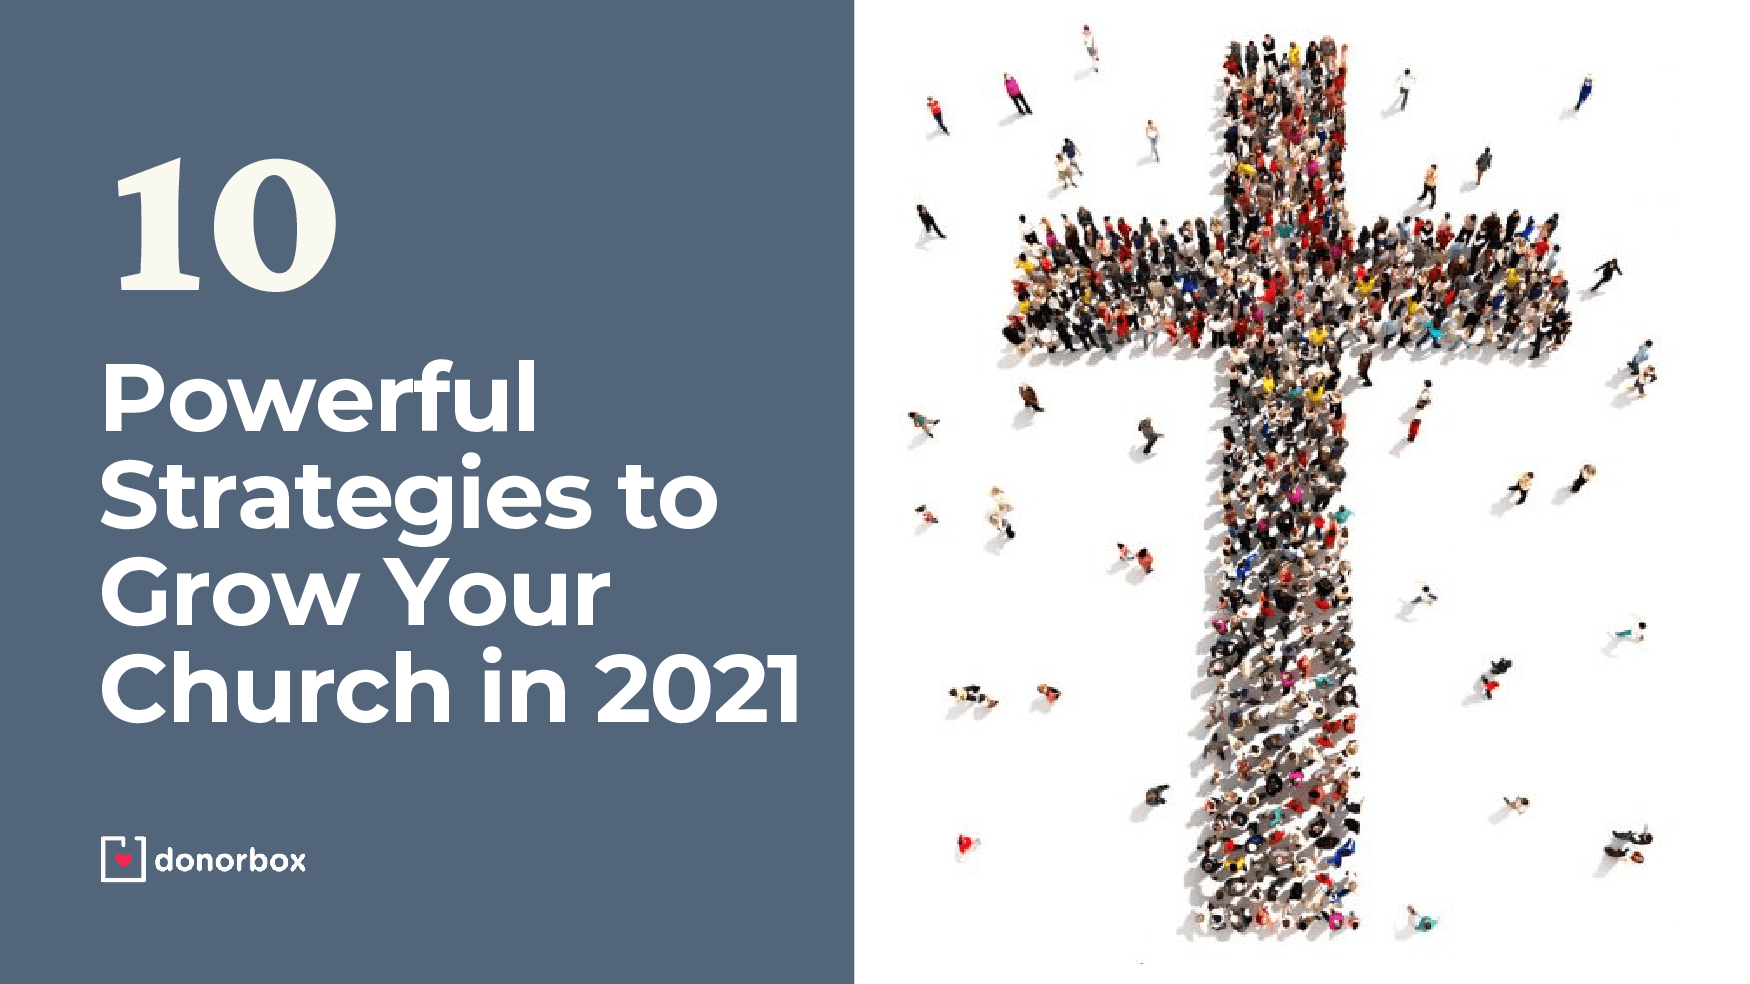 10 Powerful Strategies to Grow Your Church in 2021